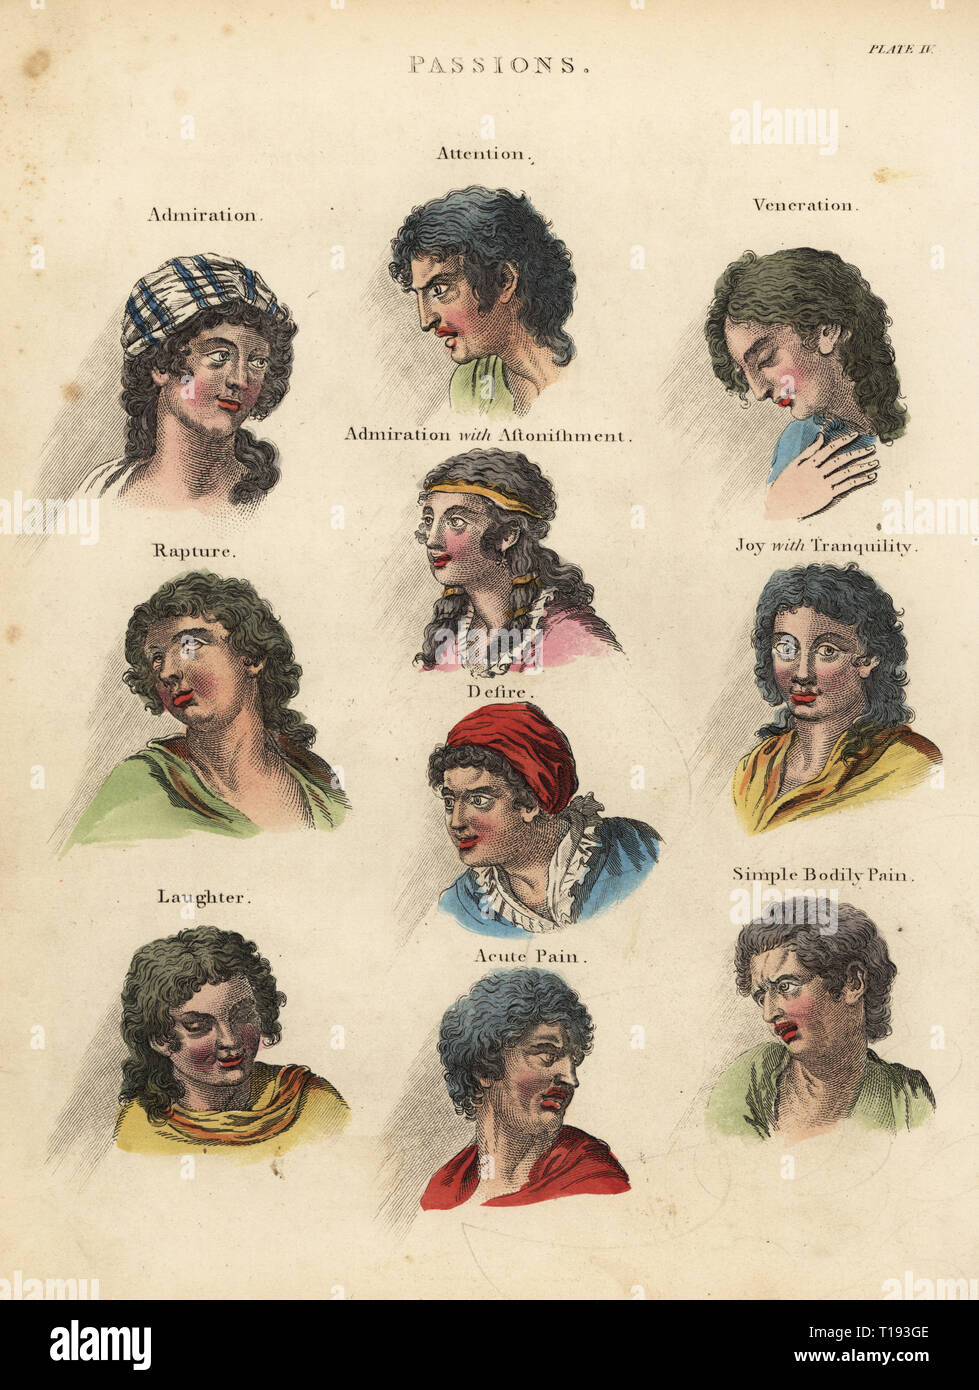 Passions from Johann Caspar Lavater’s Physiognomy. Admiration, Attention, Veneration, Admiration with Astonishment, Rapture, Joy with Tranquility, Desire, Laughter, Simple Bodily Pain, Acute Pain. Handcoloured copperplate engraving from William Smellie’s translation of Count Georges Buffon’s History of the Earth and Animated Nature, Thomas Kelly, London, 1829. Stock Photo